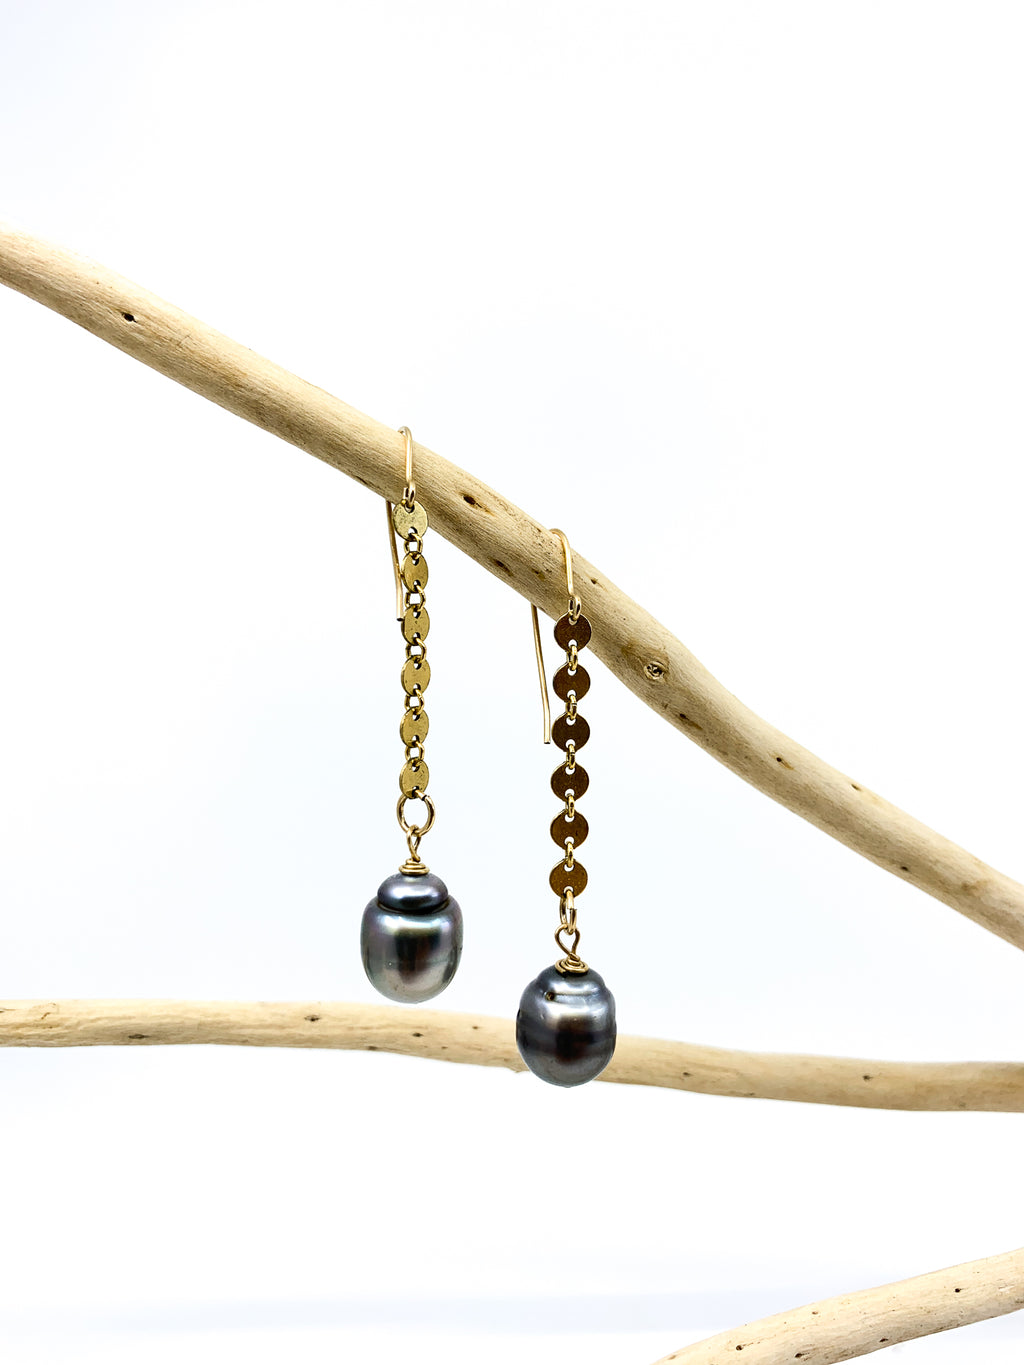 Tahitian pearl earrings with 14 karat gold fill chain by eve black jewelry made in Hawaii